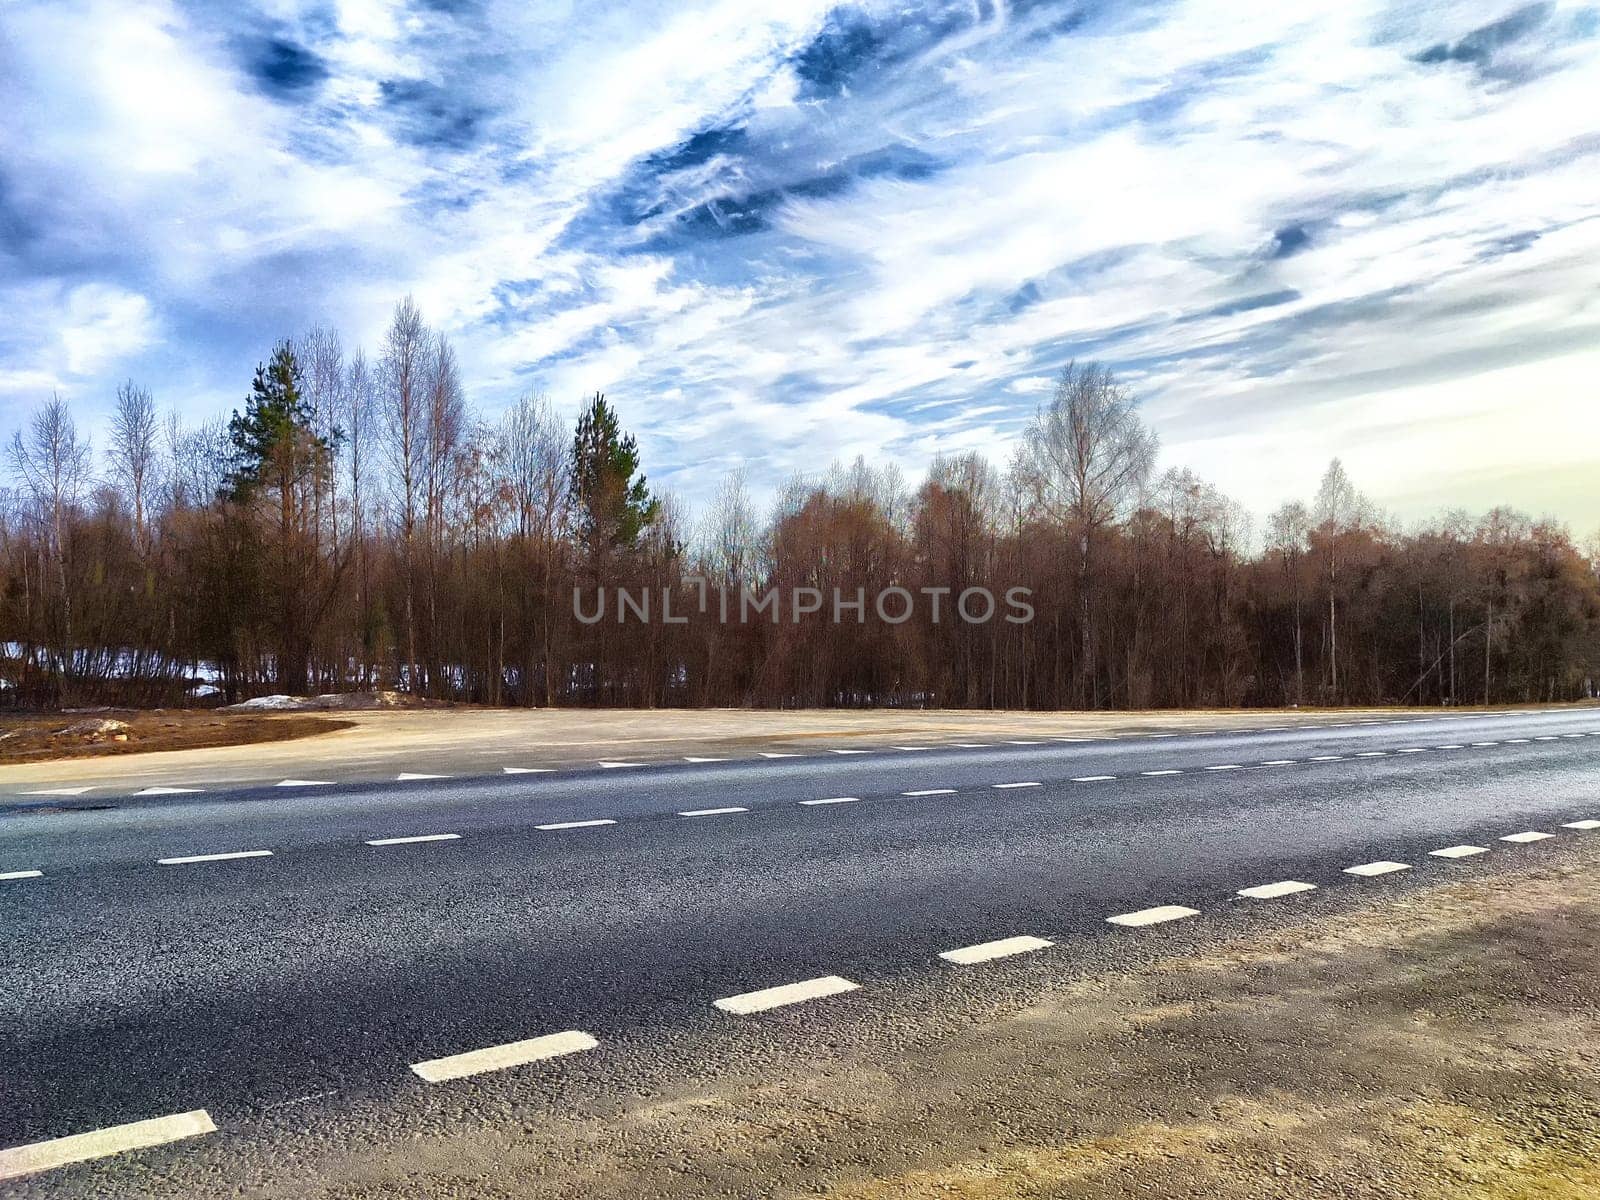 A lonely country road stretches alongside barren trees under a clear, partly cloudy sky on peaceful winter afternoon